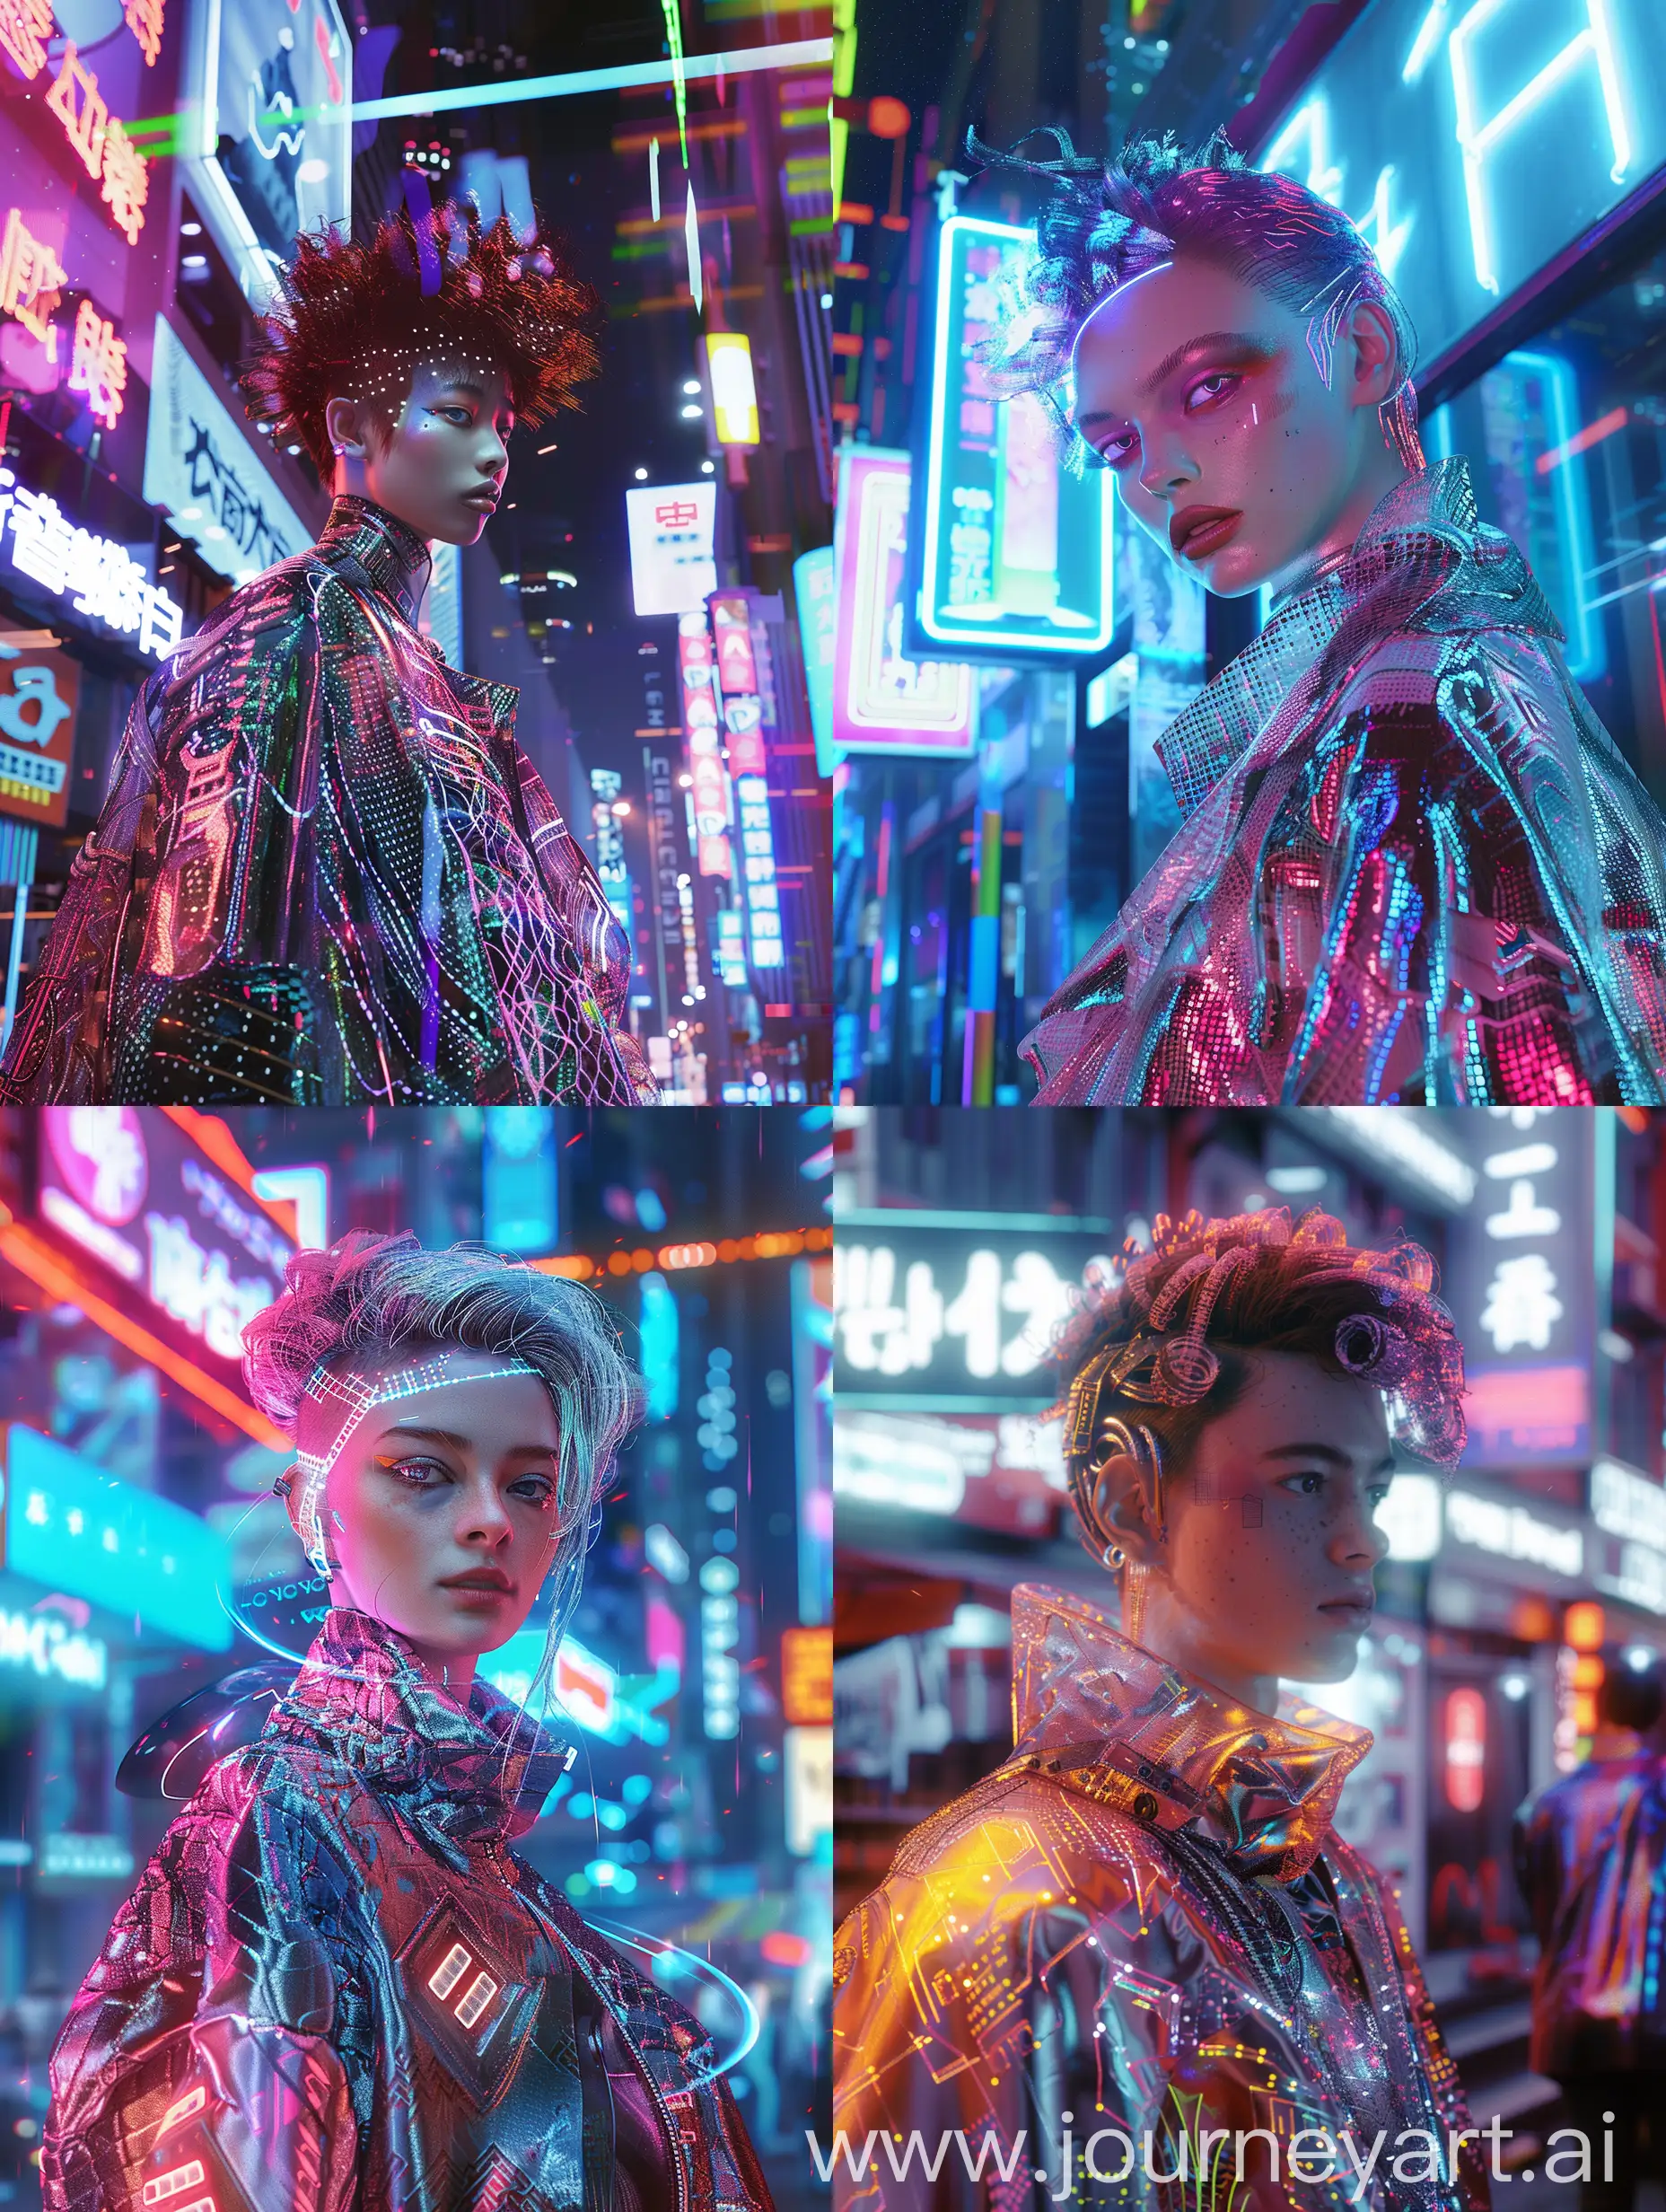 “Create an image of a modern idol with a slightly sci-fi aesthetic. The idol should have an aura of futuristic elegance, blending cutting-edge fashion with a hint of advanced technology. The scene is set in a sleek, high-tech urban environment, with glowing neon lights and holographic billboards in the background. The idol is dressed in a stylish outfit that combines metallic fabrics and avant-garde design elements, featuring intricate patterns and subtle lighting effects integrated into the clothing. Their hair is styled in a contemporary, eye-catching manner, with vibrant, futuristic colors. The overall look should be realistic, as if the image was captured in a professional photoshoot, showcasing the idol’s charisma and the advanced, near-future setting. Ensure the lighting and shadows are well-balanced to enhance the realism and high-quality appearance of the image.”